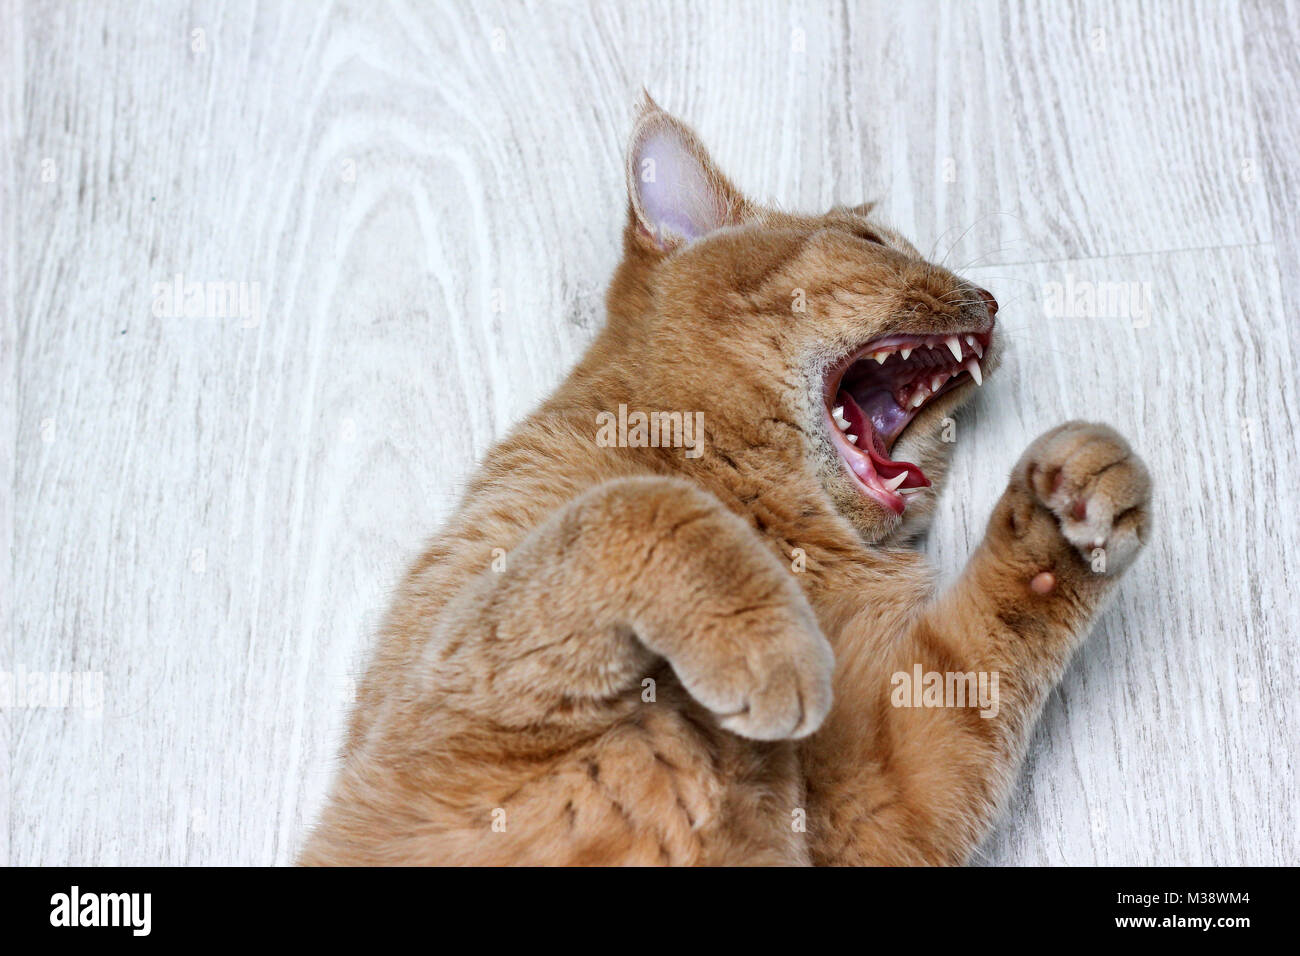 A cute tabby cat is lying on the floor and looking very funny, like it is screaming on something. Stock Photo